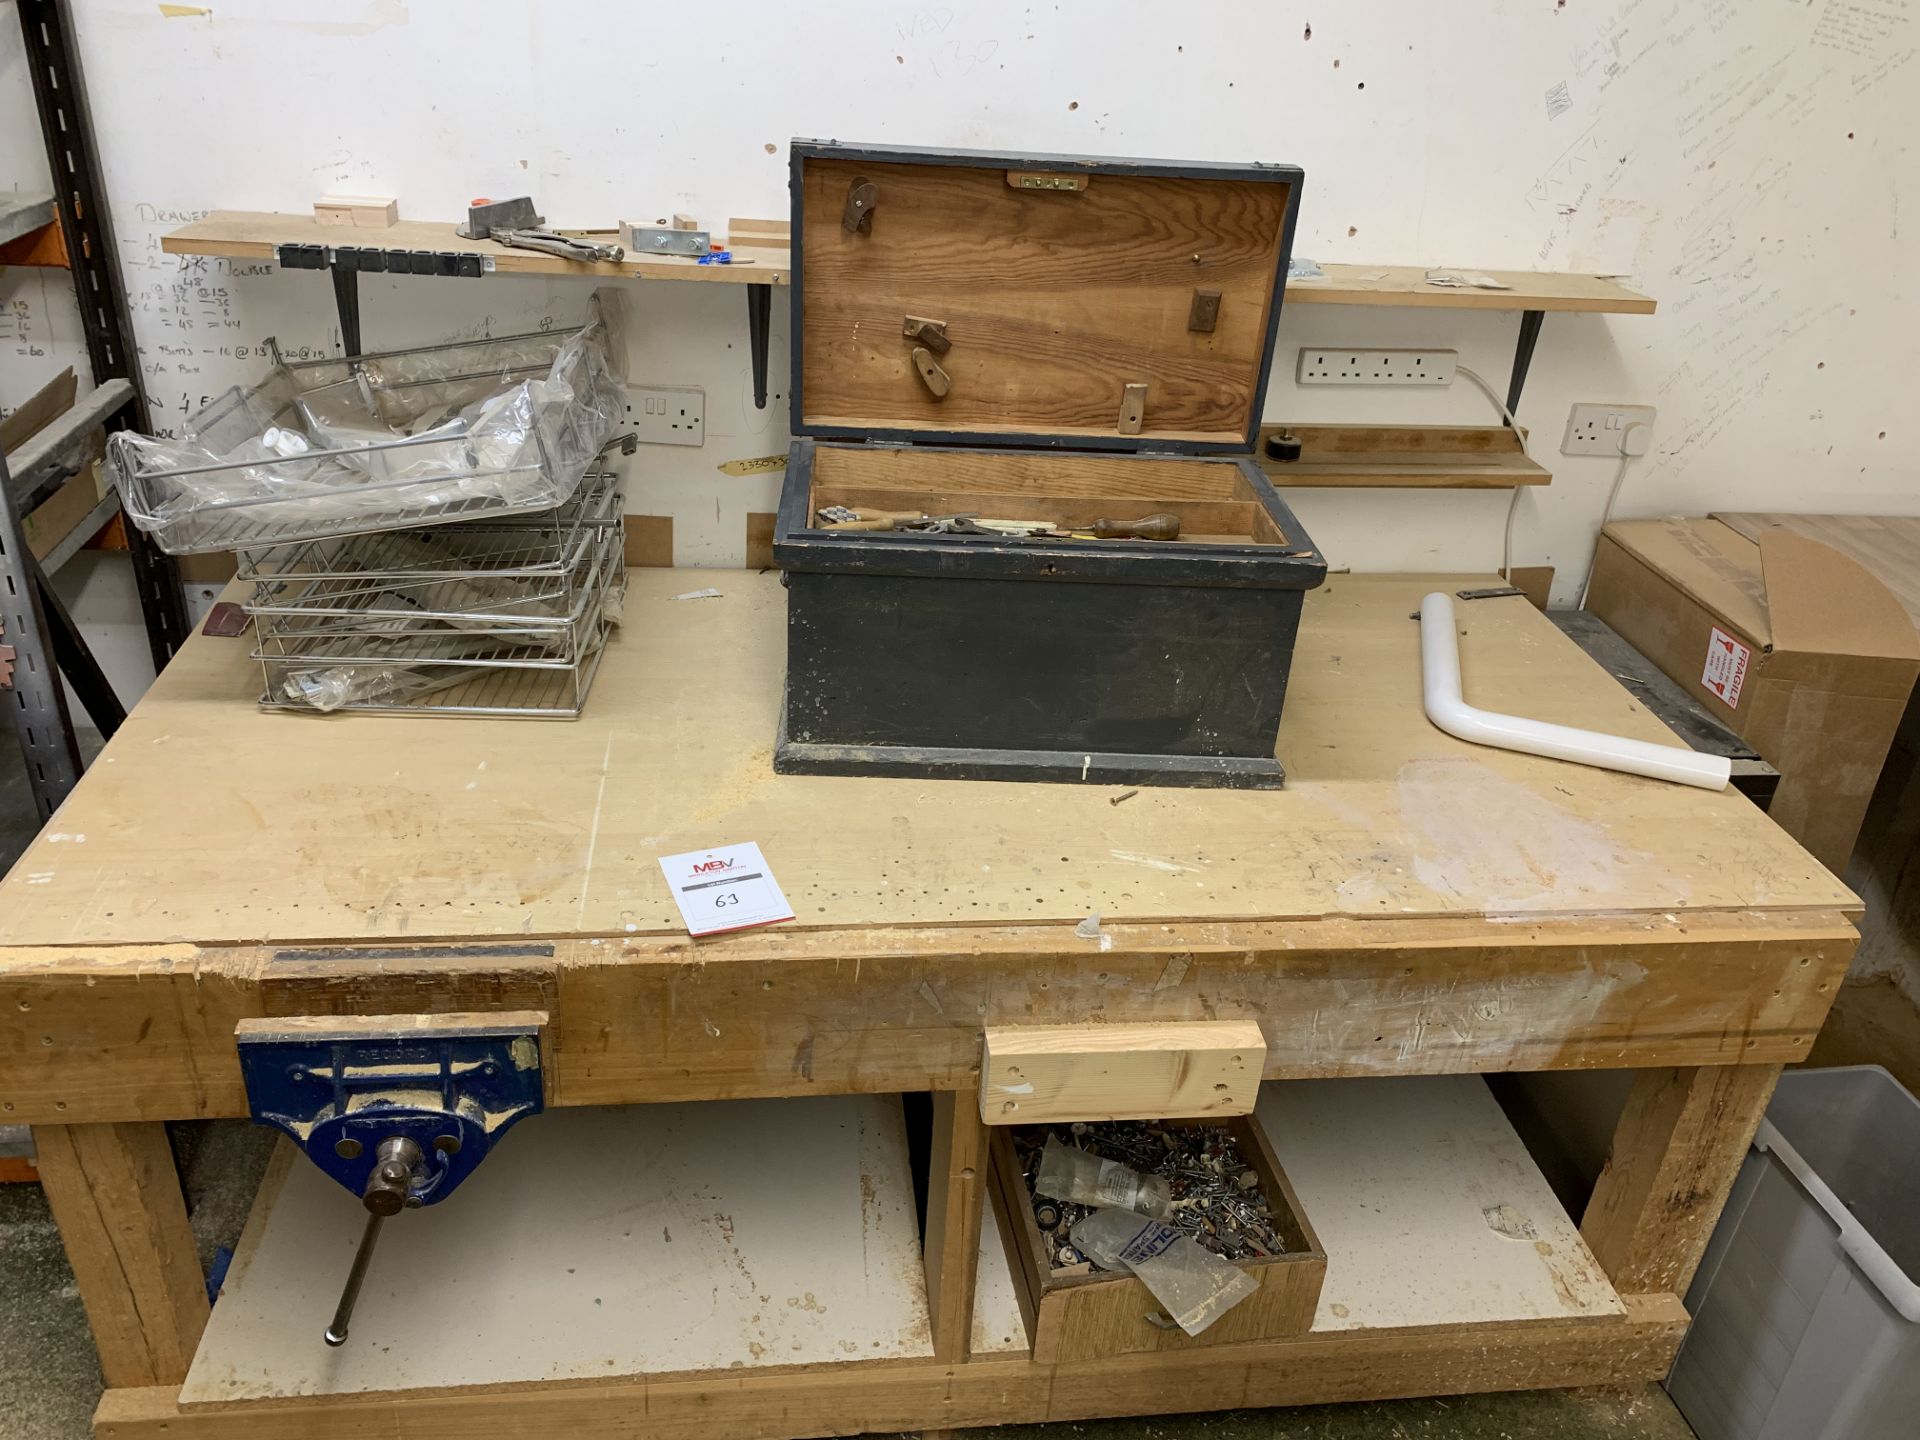 Bench and contents including tool box